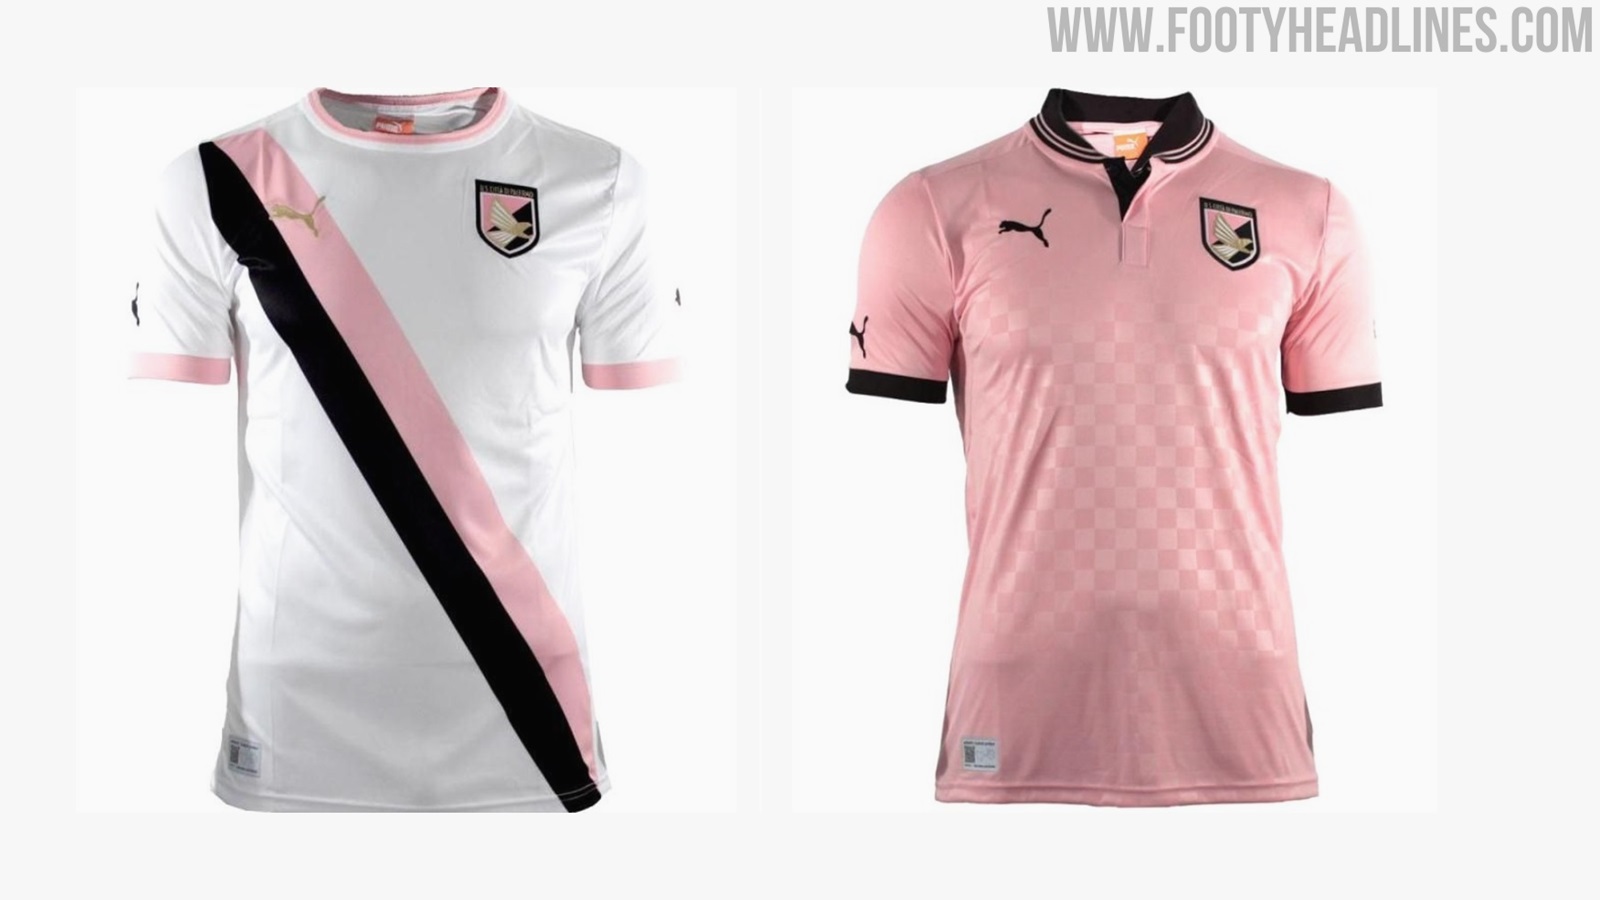 City Football Group wants to buy Palermo